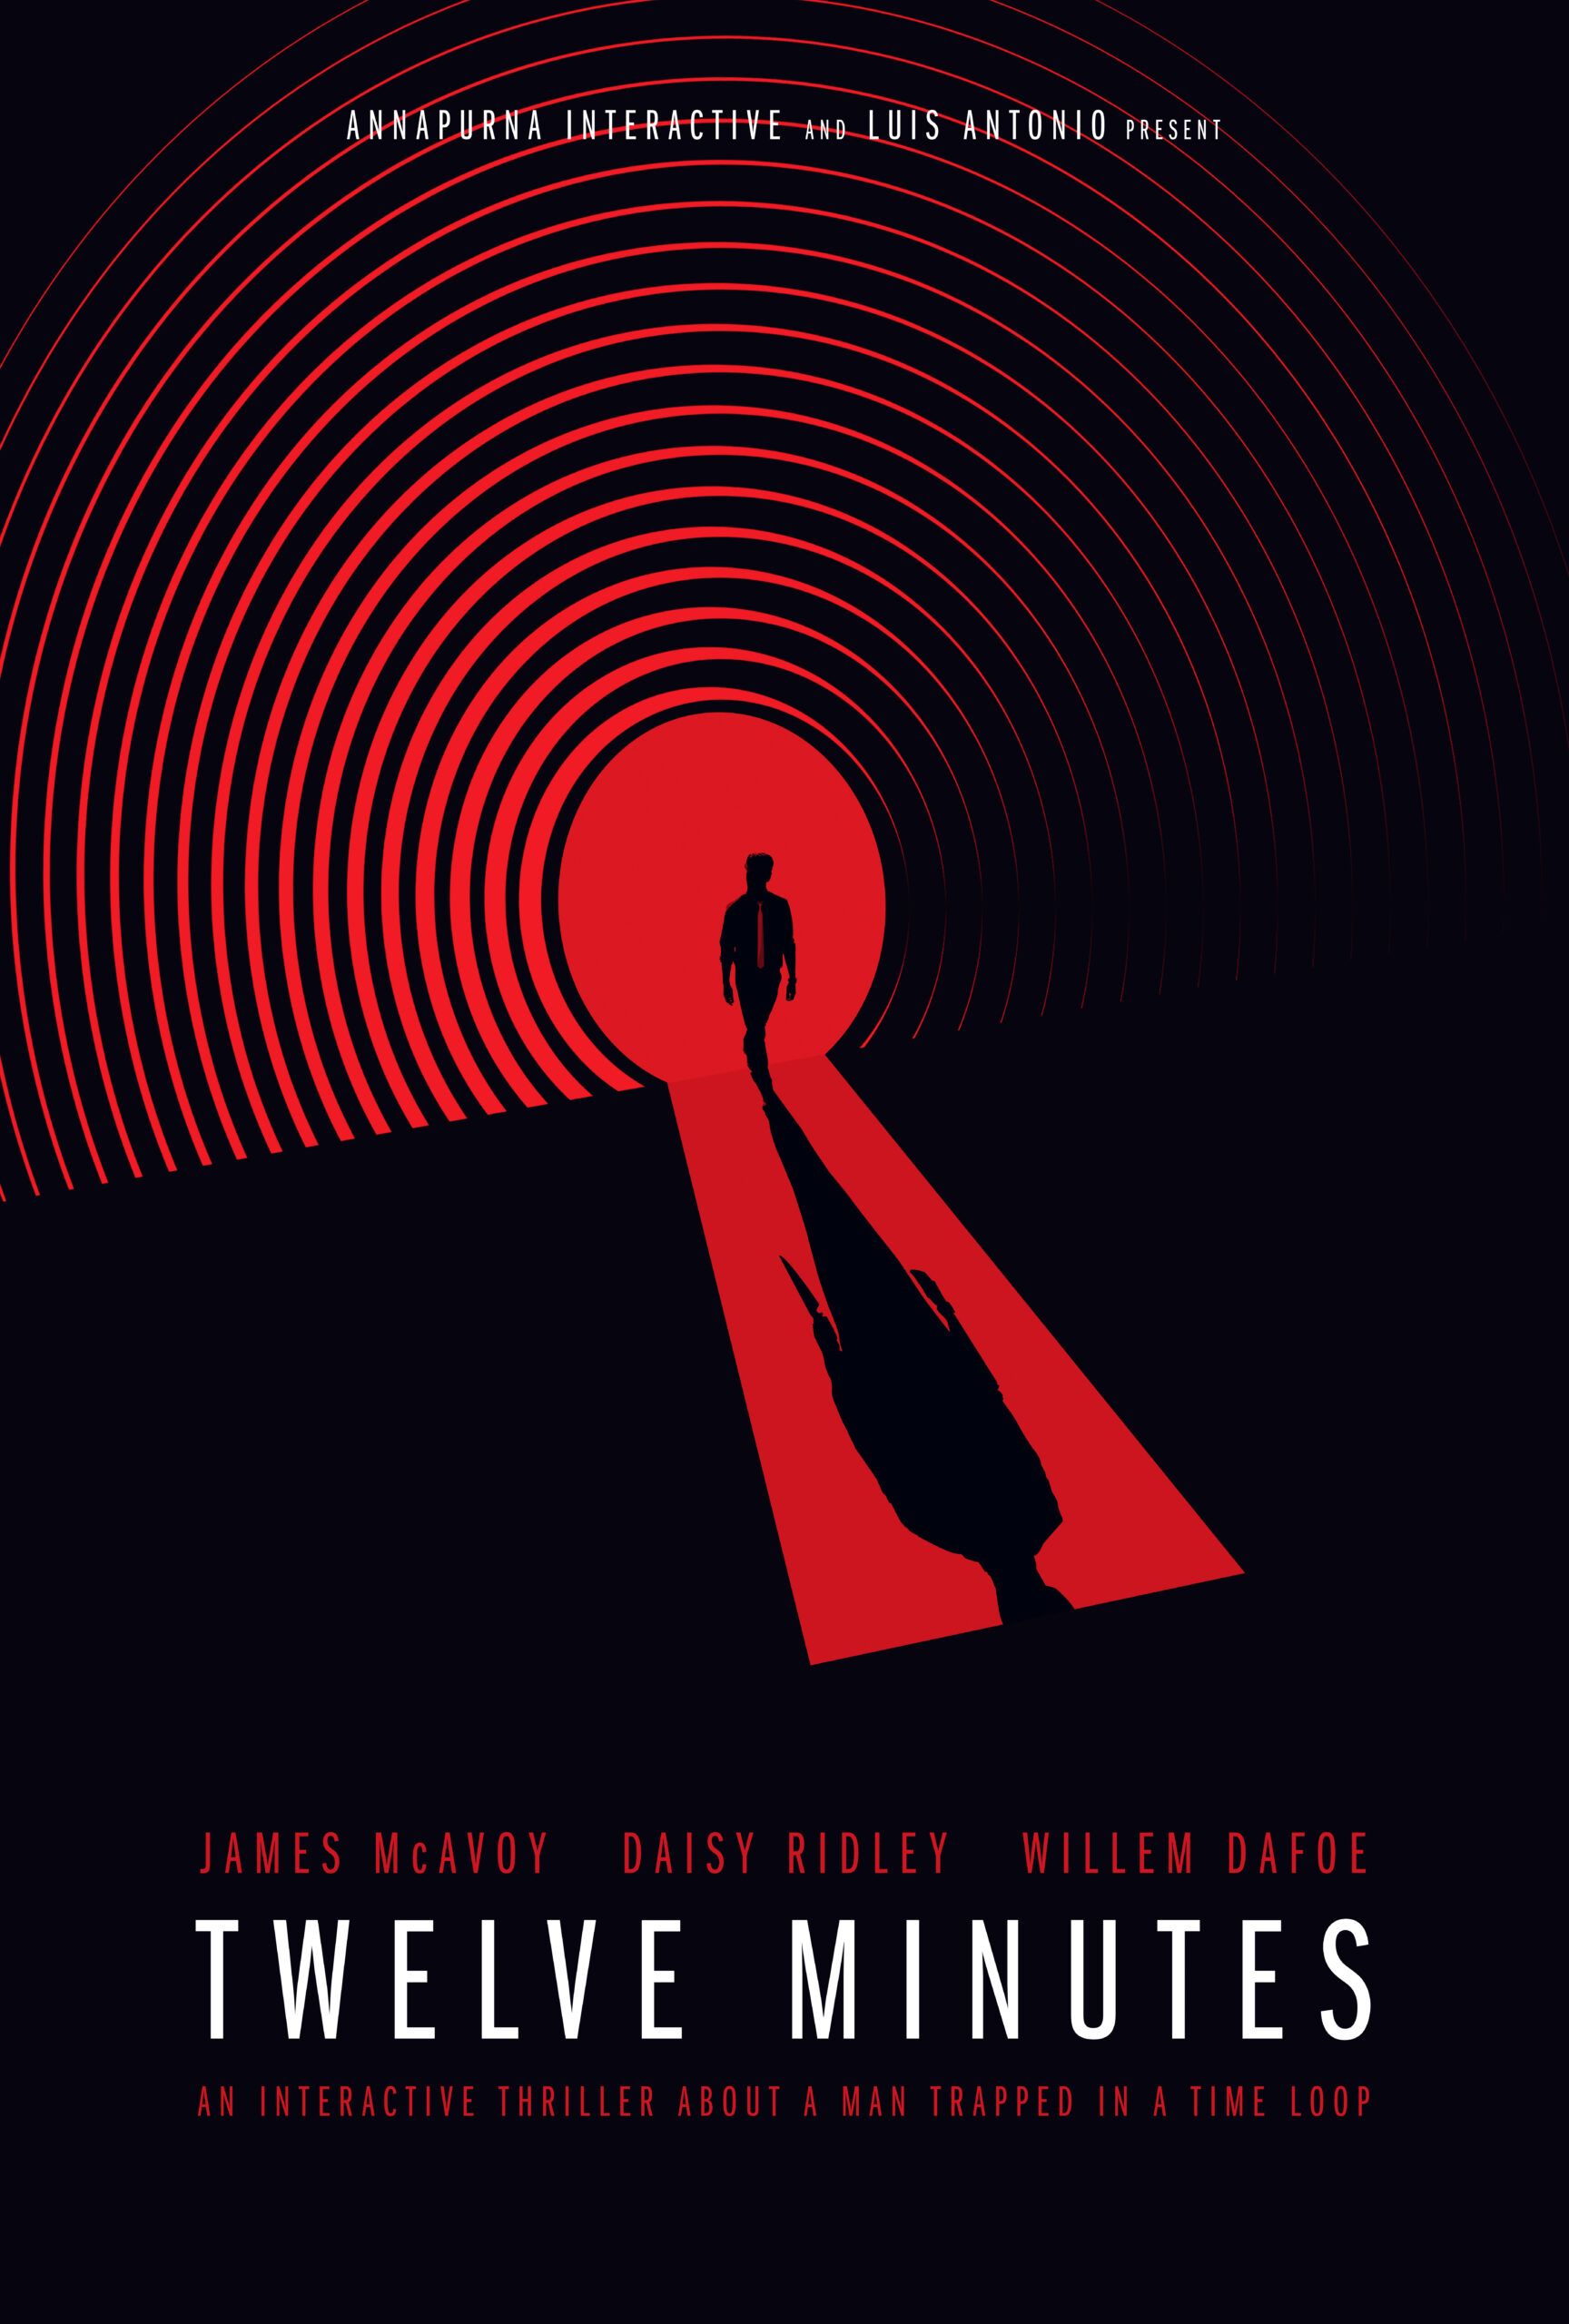 Official poster released for 12 Minutes.